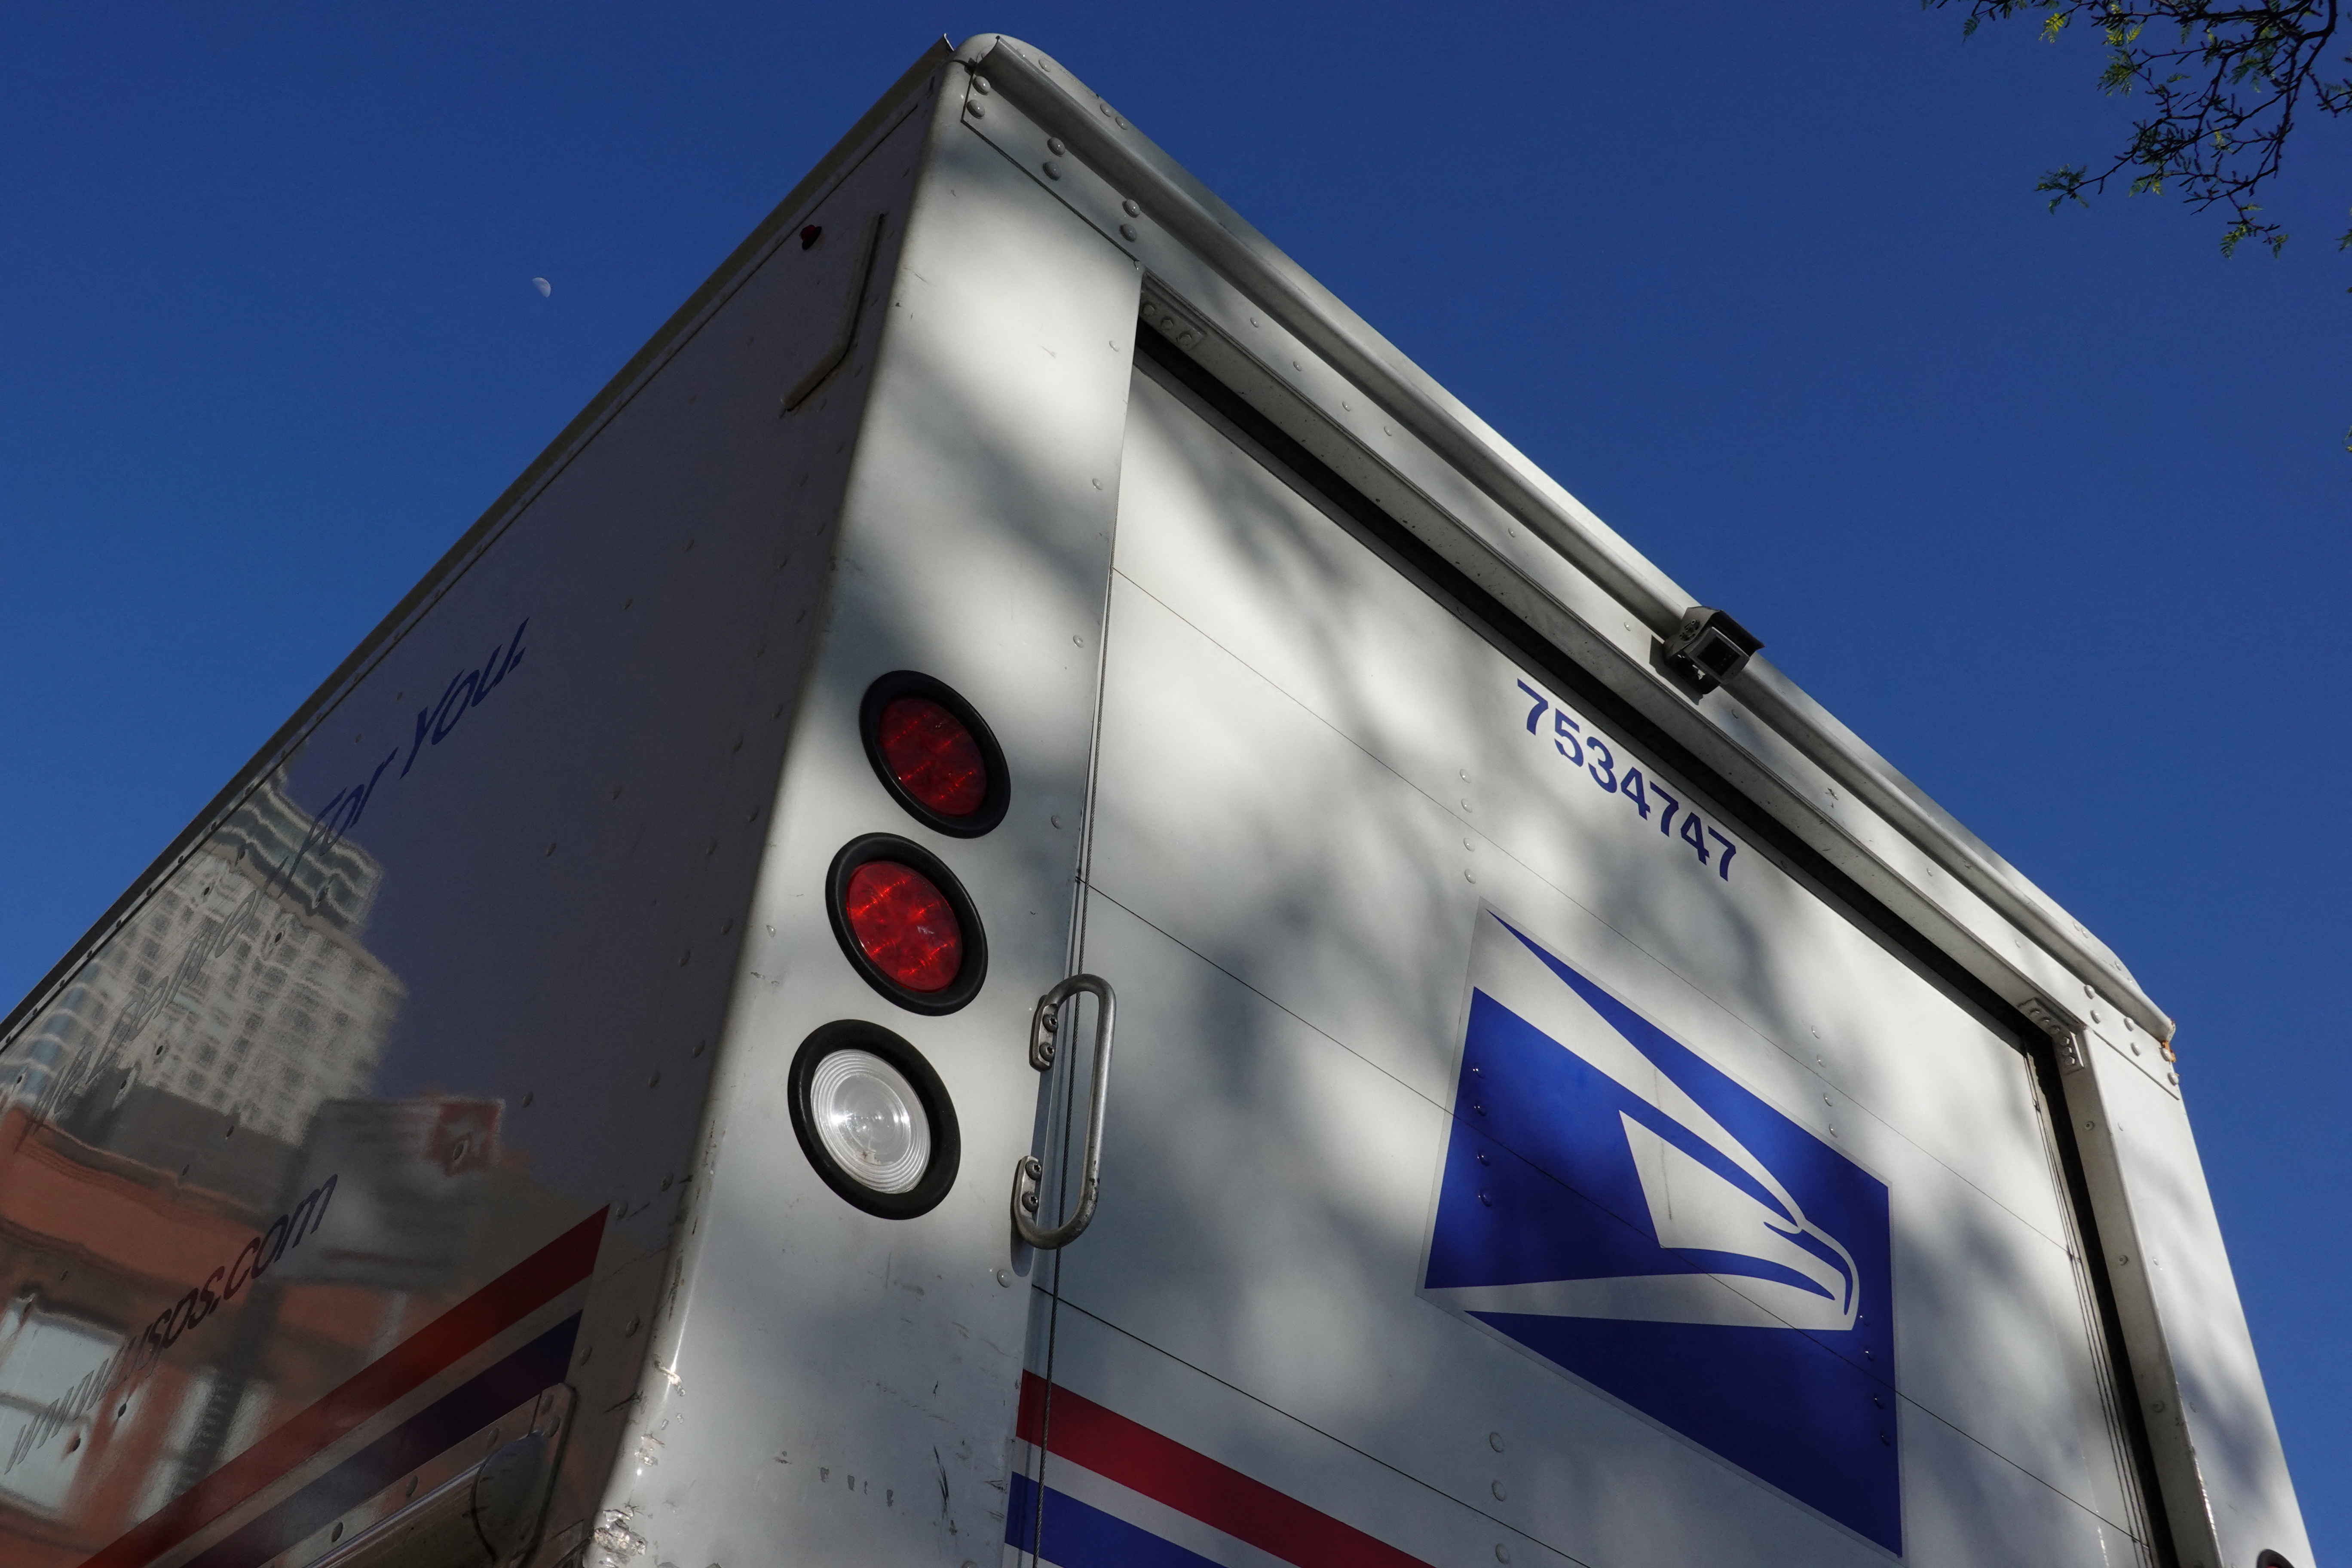 The new electric USPS mail truck is America's most important